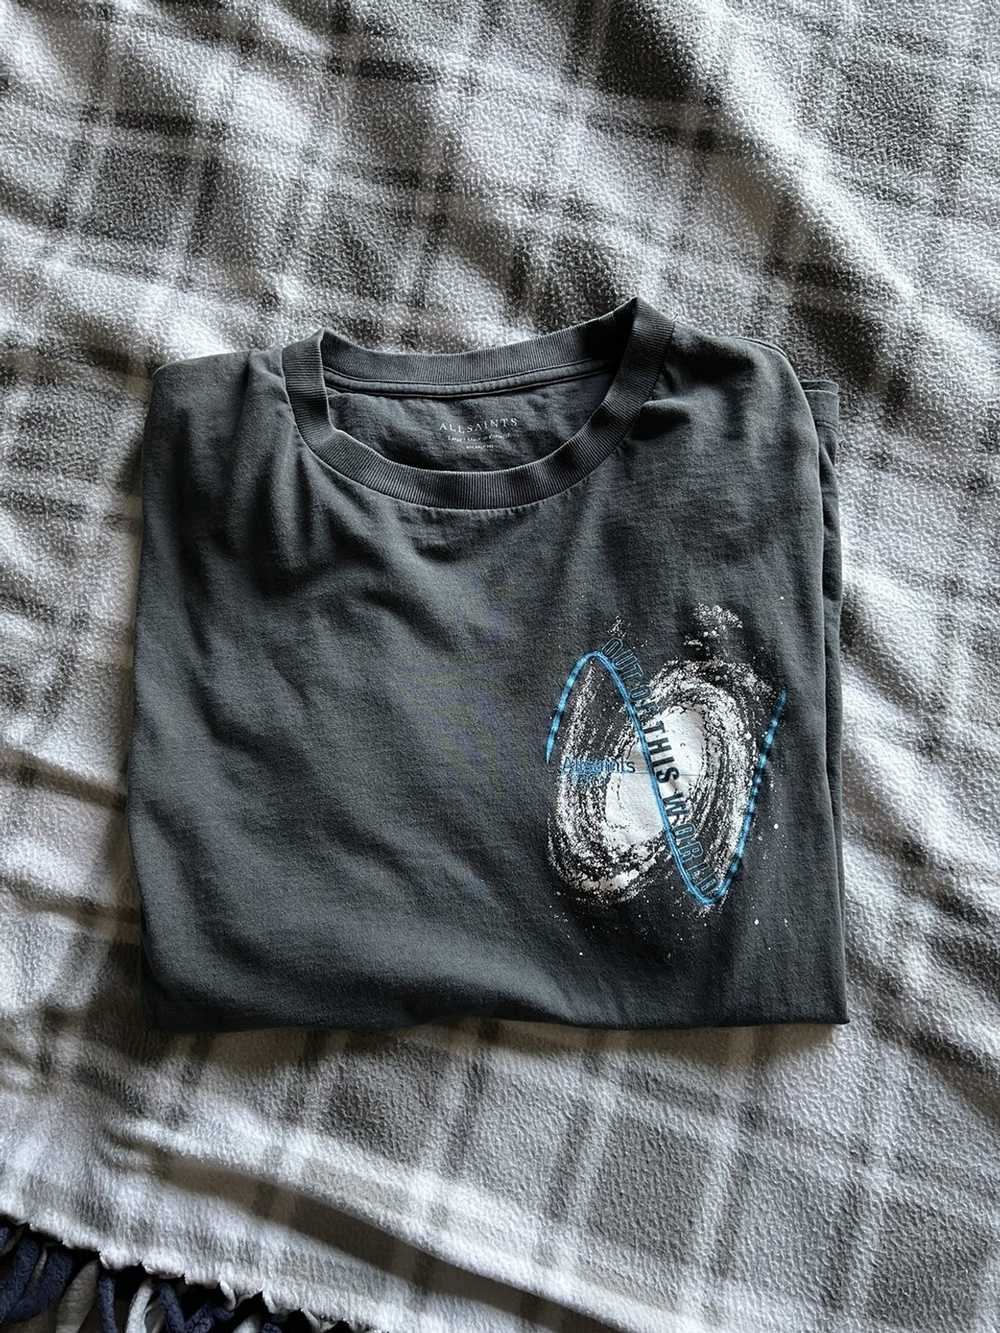 Allsaints Allsaints “Out of this world” Tee - image 1